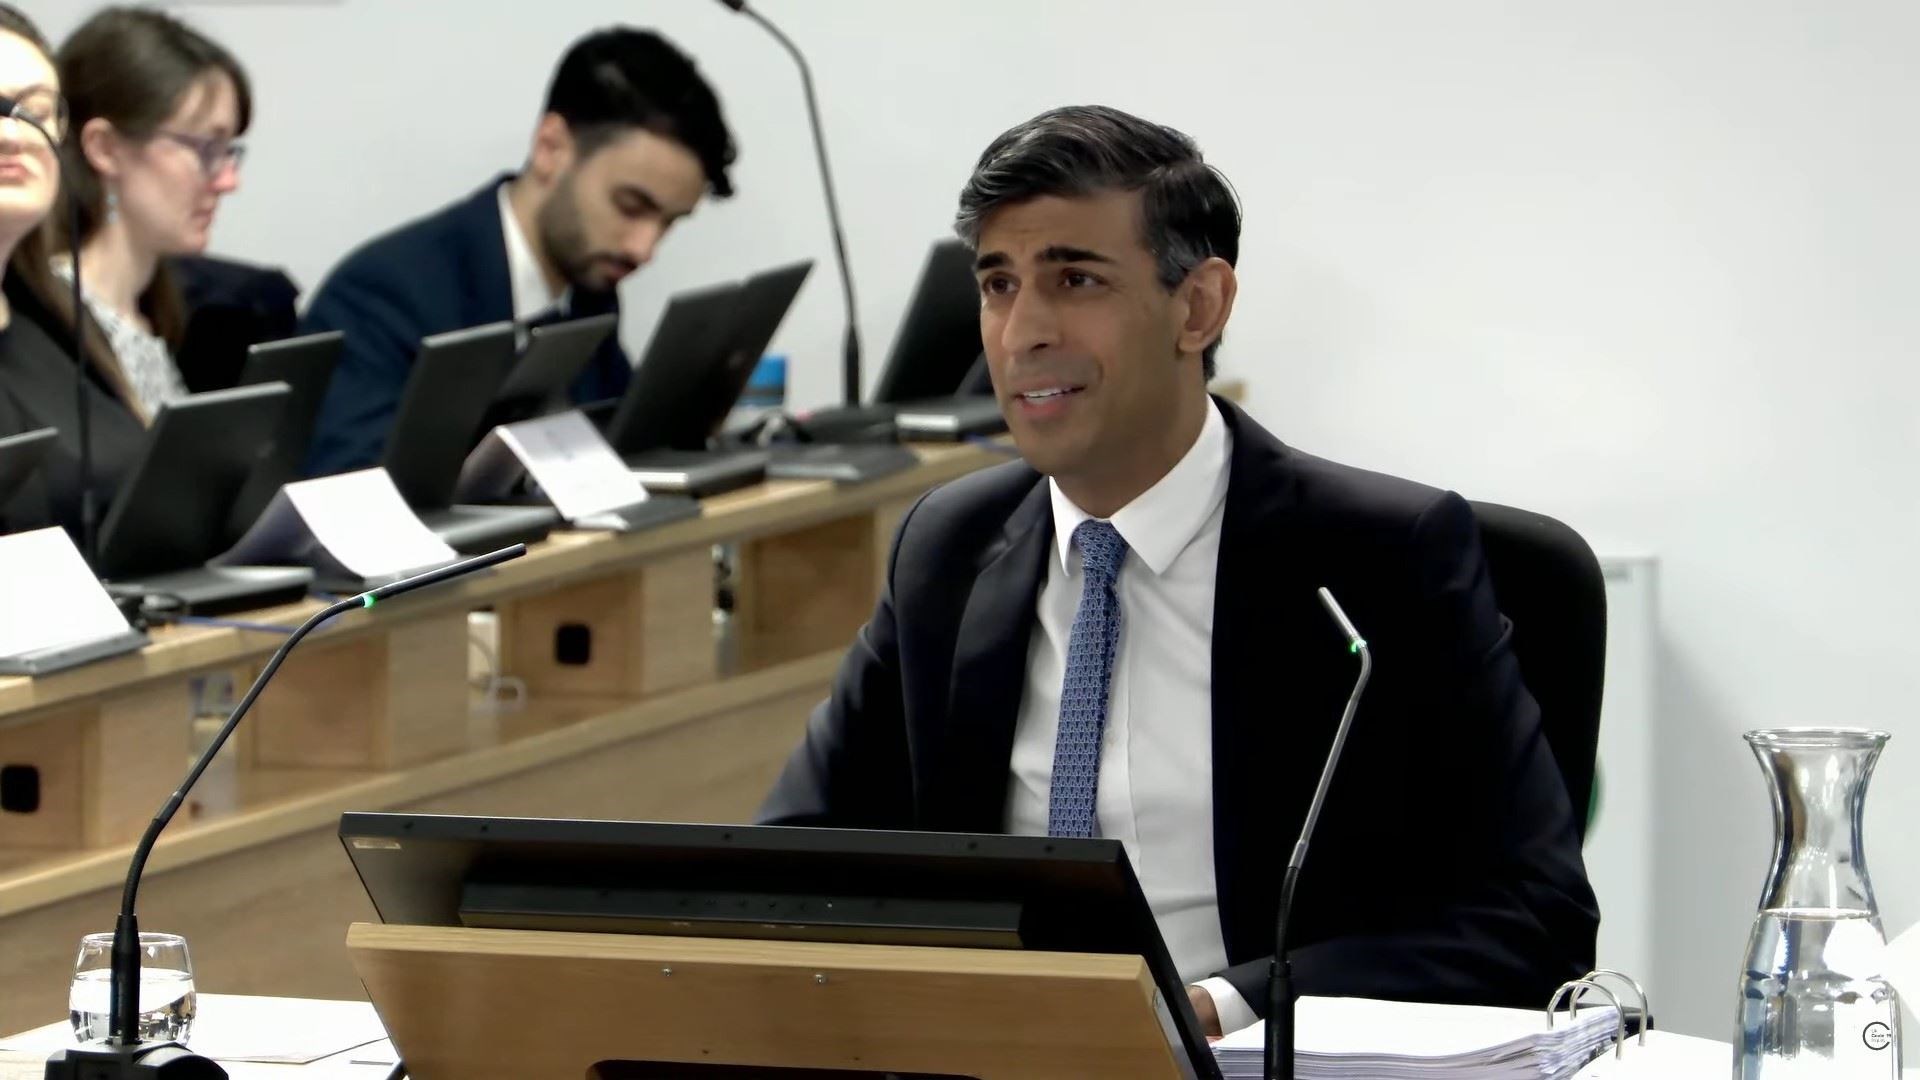 Mr Sunak spent Monday giving evidence to the UK Covid-19 Inquiry about his time as chancellor (UK Covid-19 Inquiry/PA)